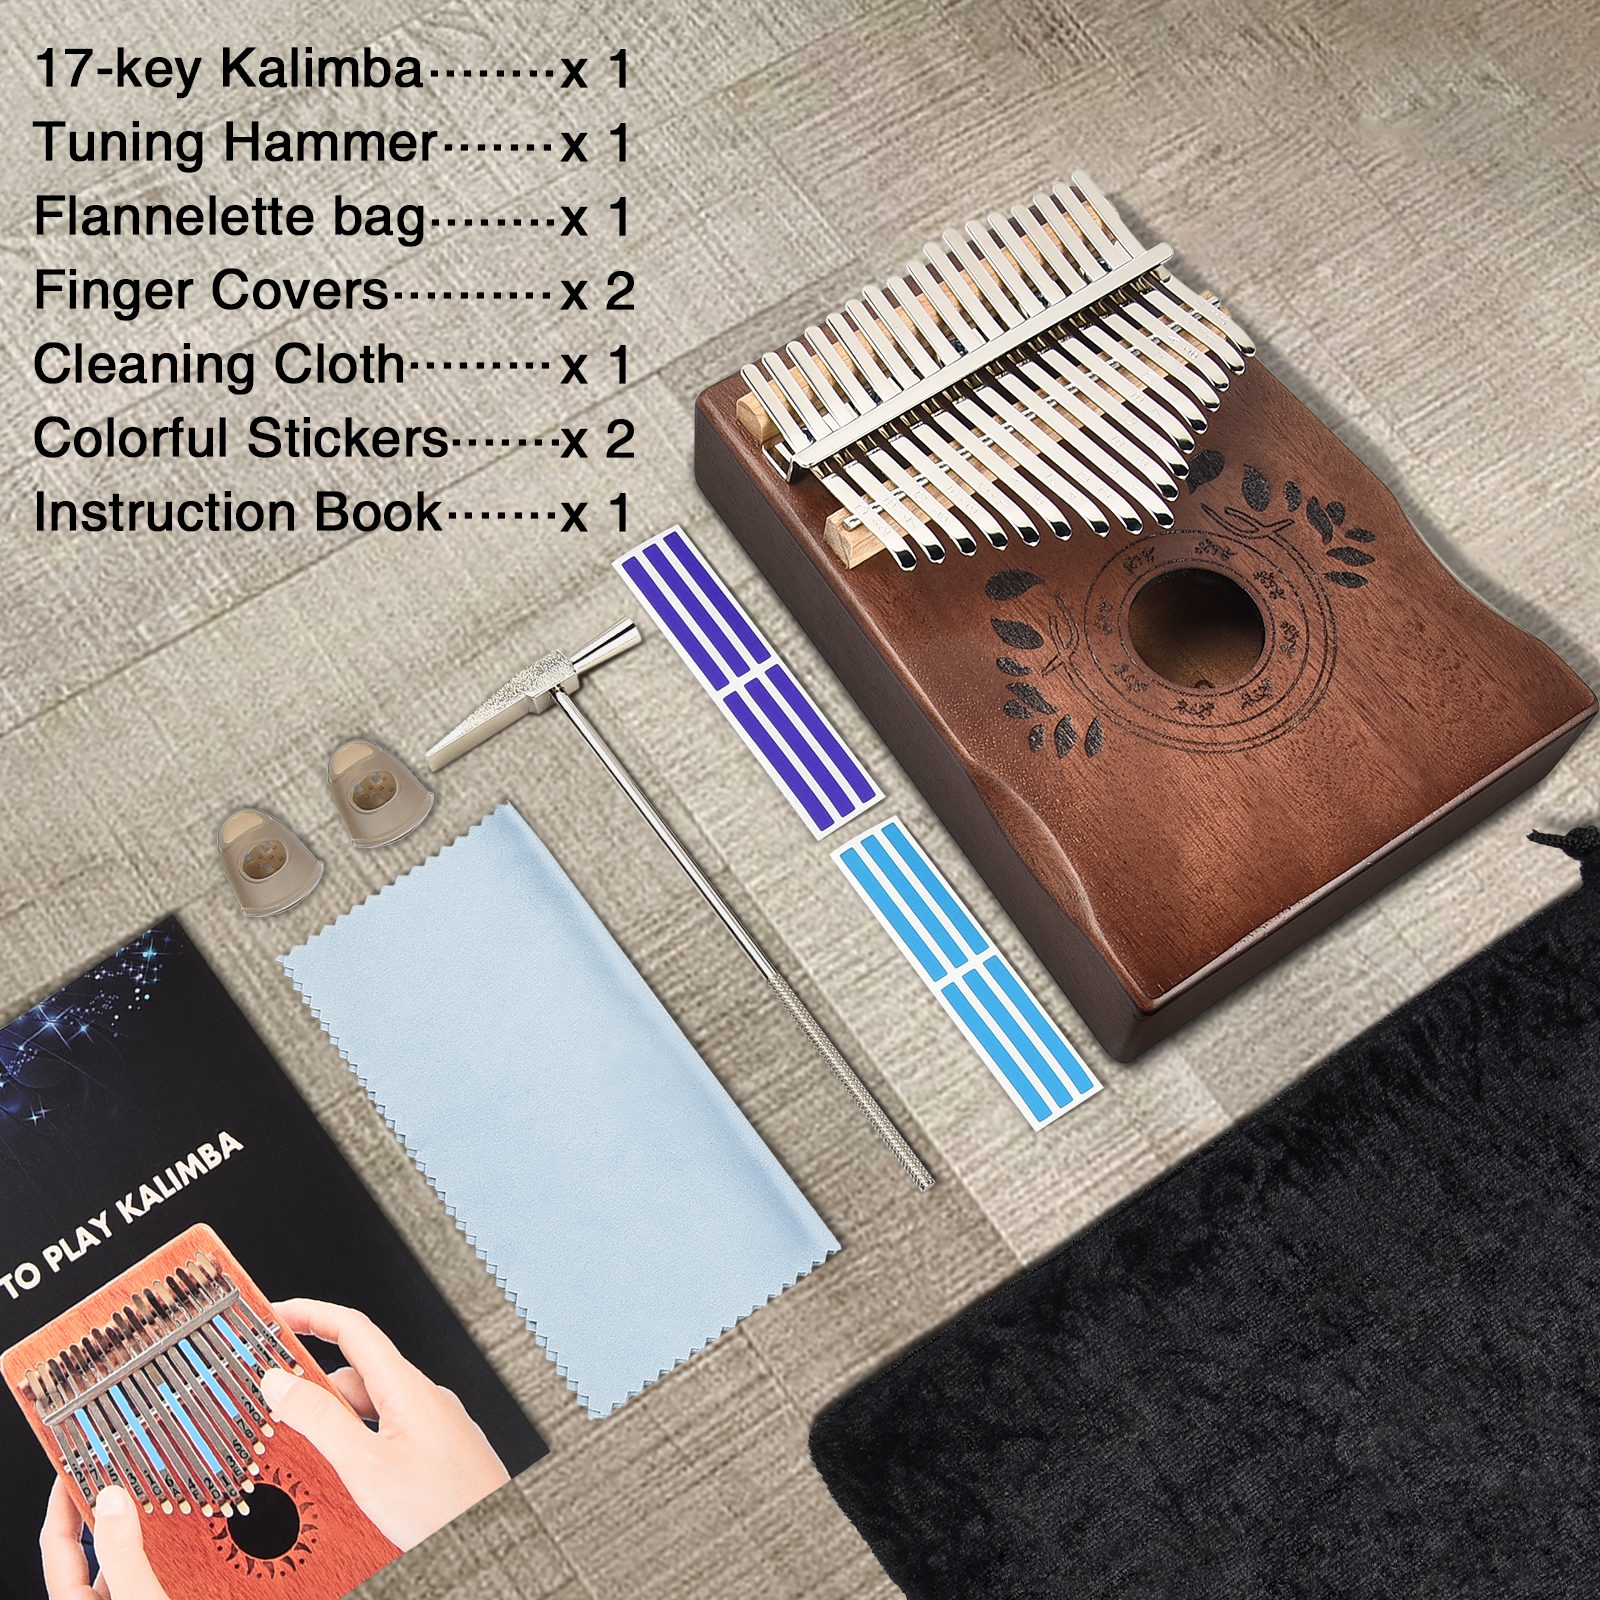 [kit complet] kalimba feuille d'automne 17 notes